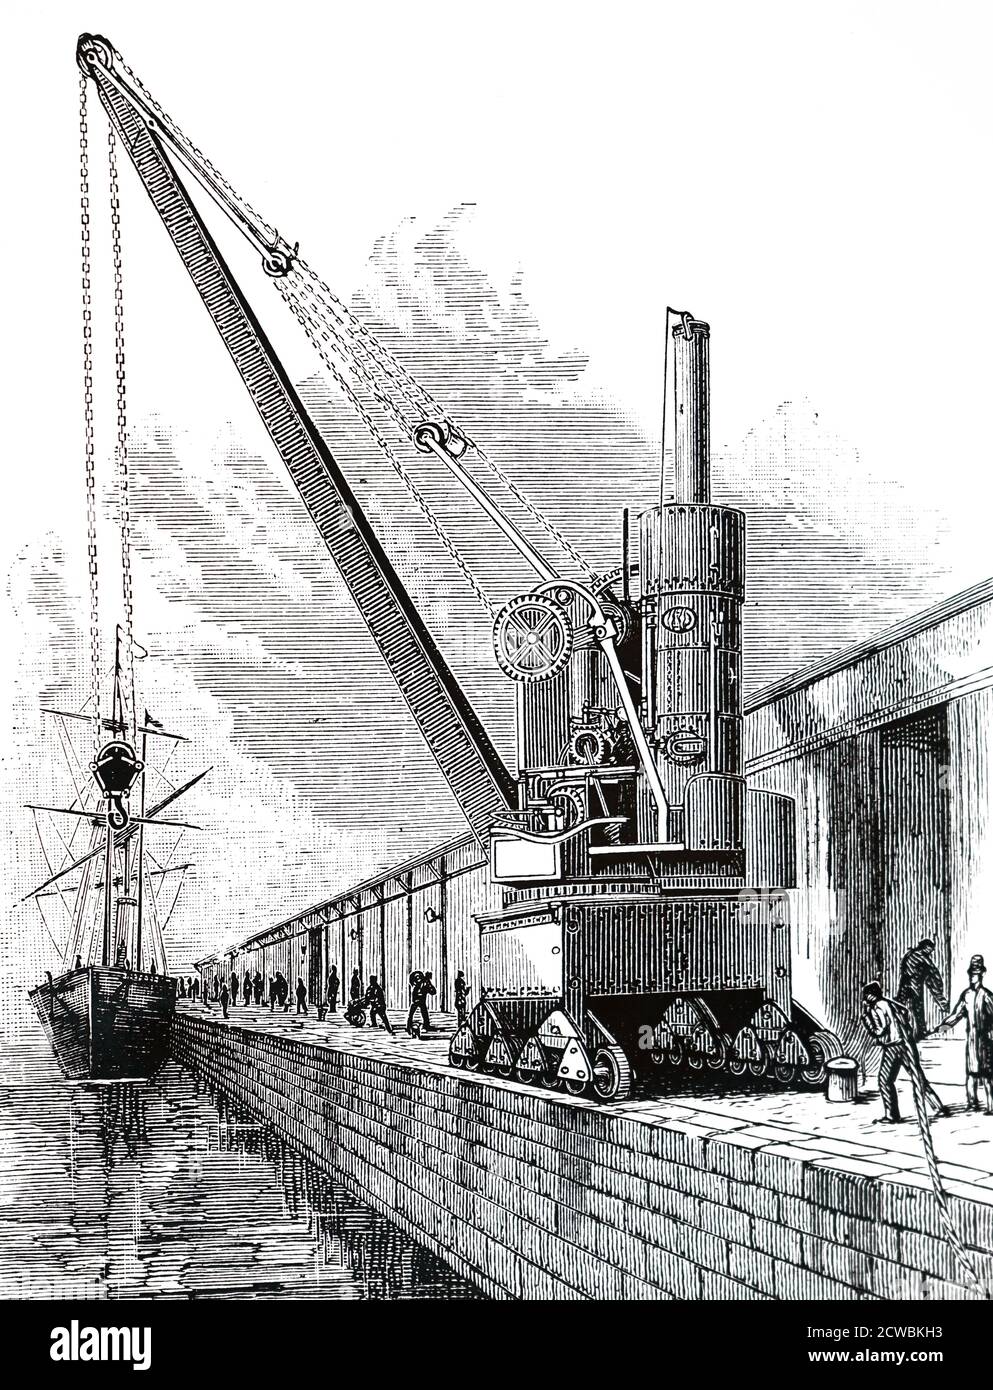 Engraving depicting a George Russell & Co. 20-ton steam crane, used by the Anchor line for loading and unloading vessels. Stock Photo